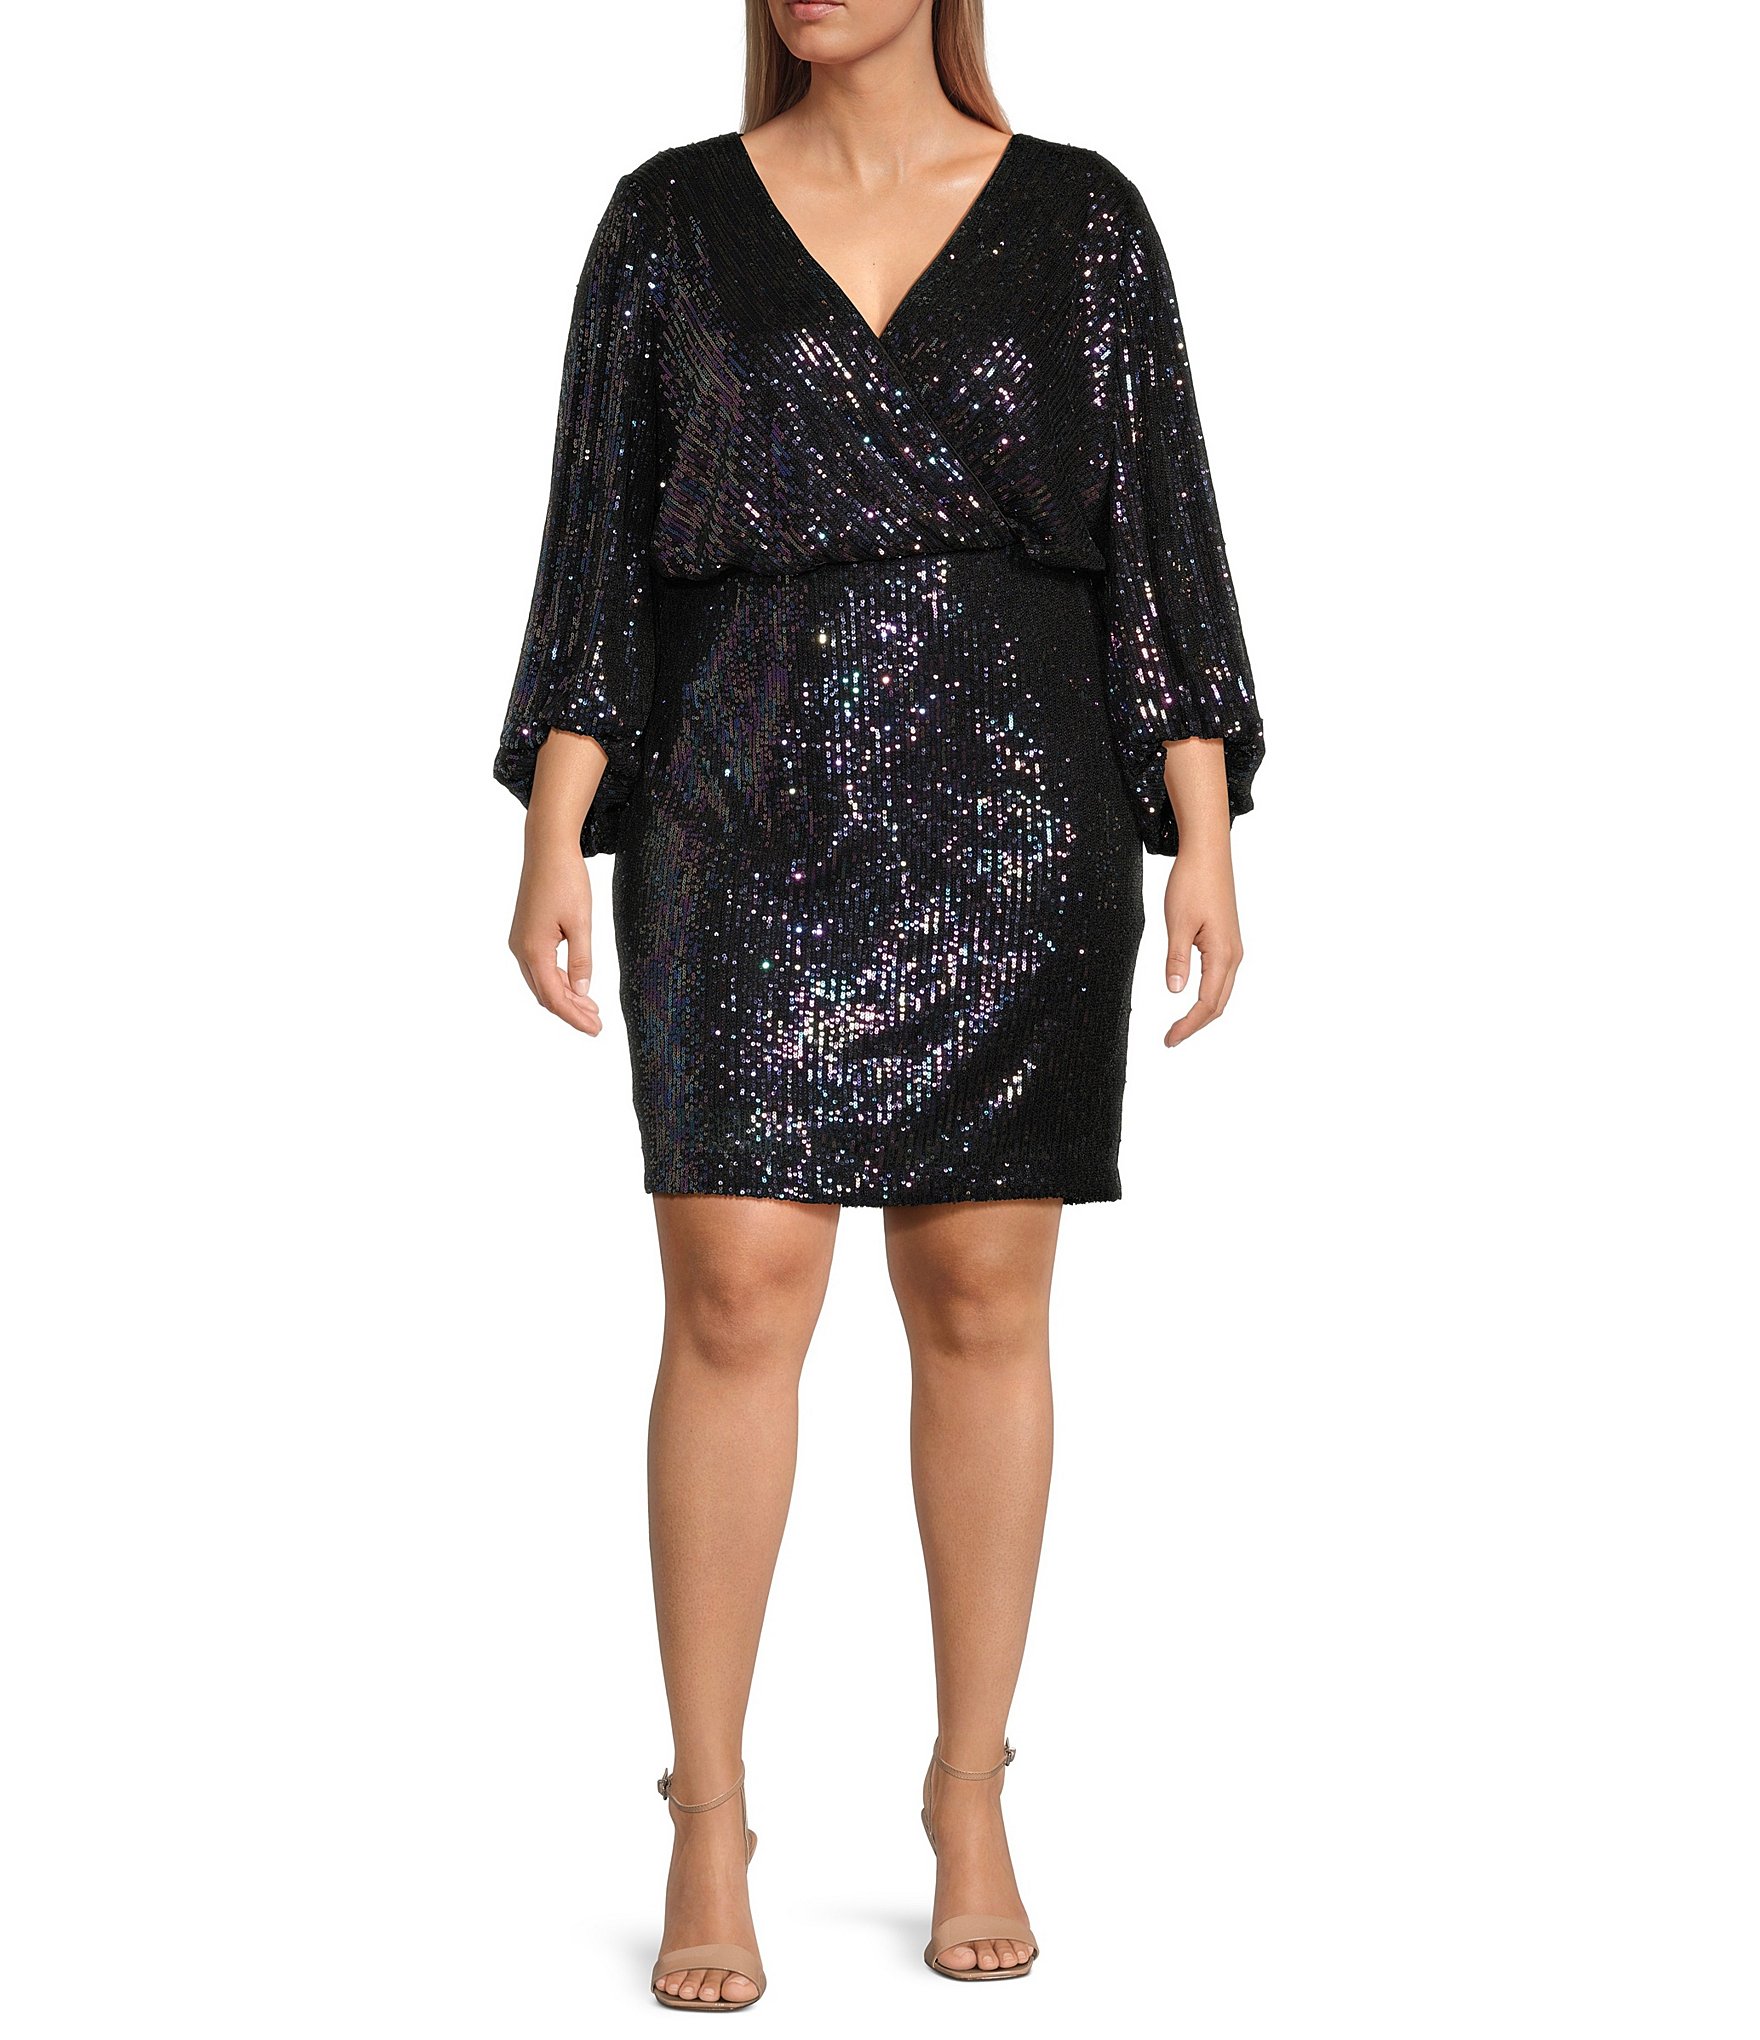 Bowen Long-Sleeve Sequin Embroidered Dress - PLUS SIZE